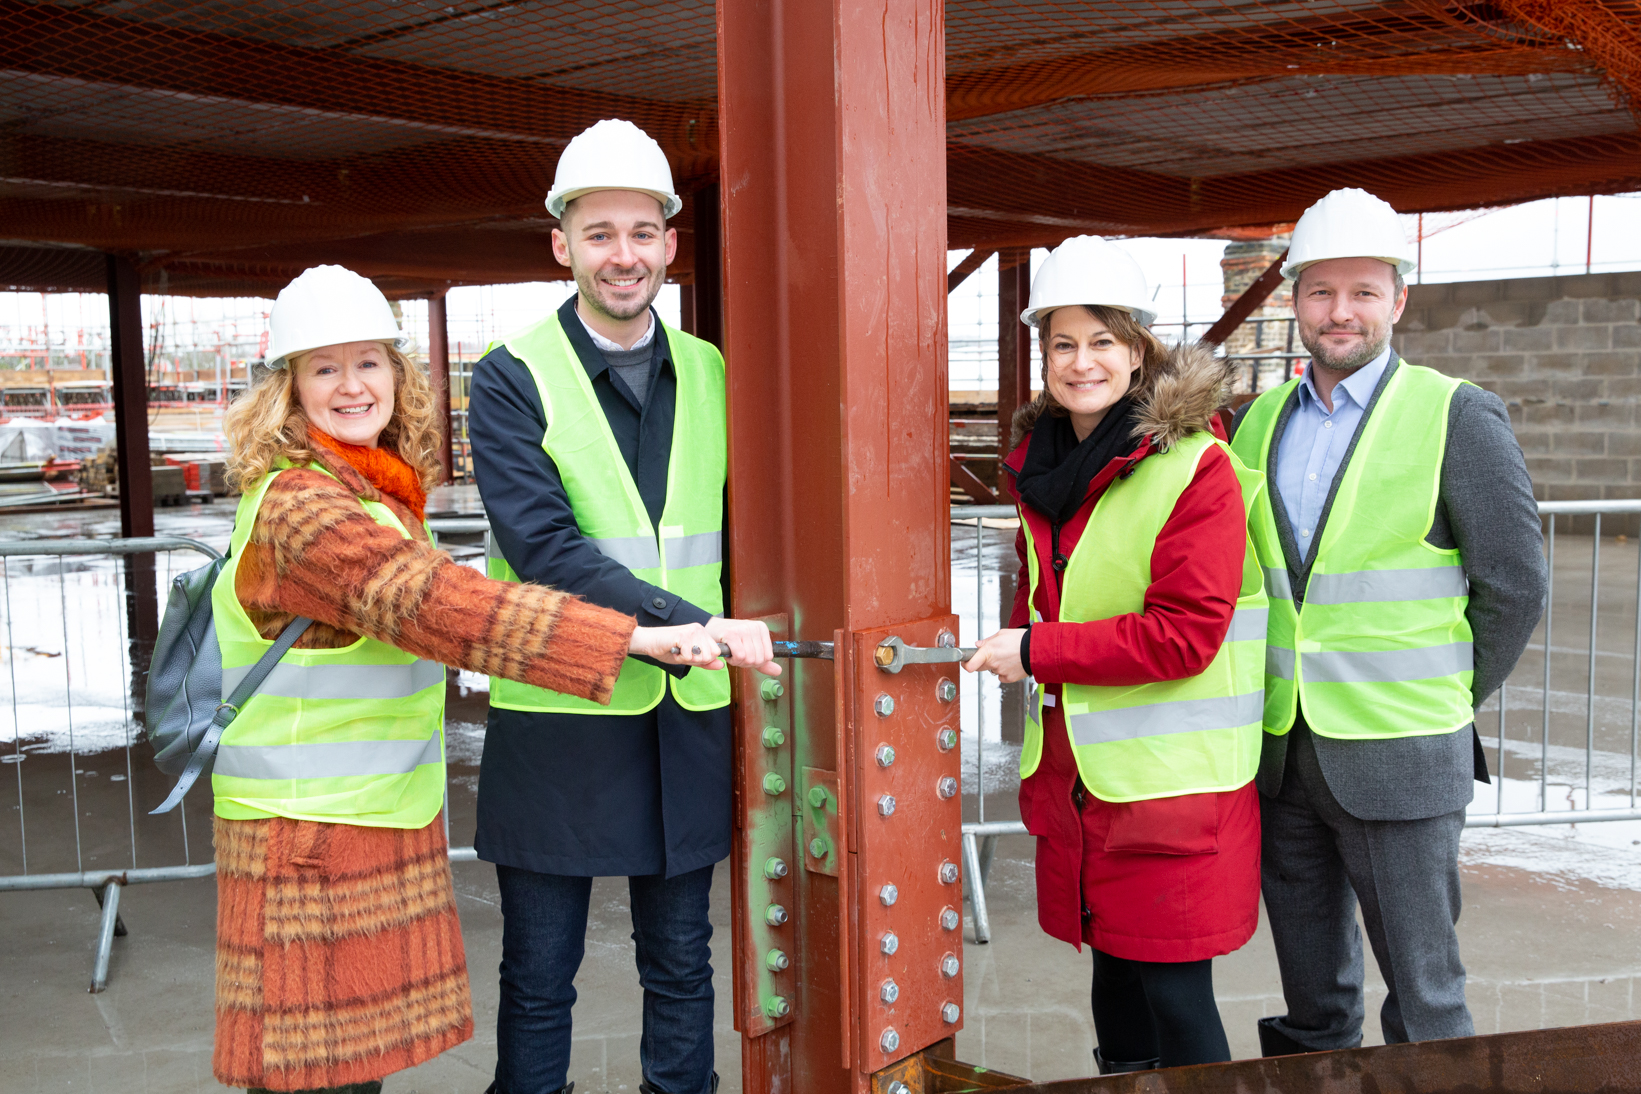 Coldharbour councillor Scarlett O'Hara, Cabinet Member for Planning, Investment and New Homes Matthew Bennett, Dulwich & West Norwood MP Helen Hayes, and Lambeth Council leader Jack Hopkins, help to tighten the ceremonial bolt in the new Ovalhouse Theatre